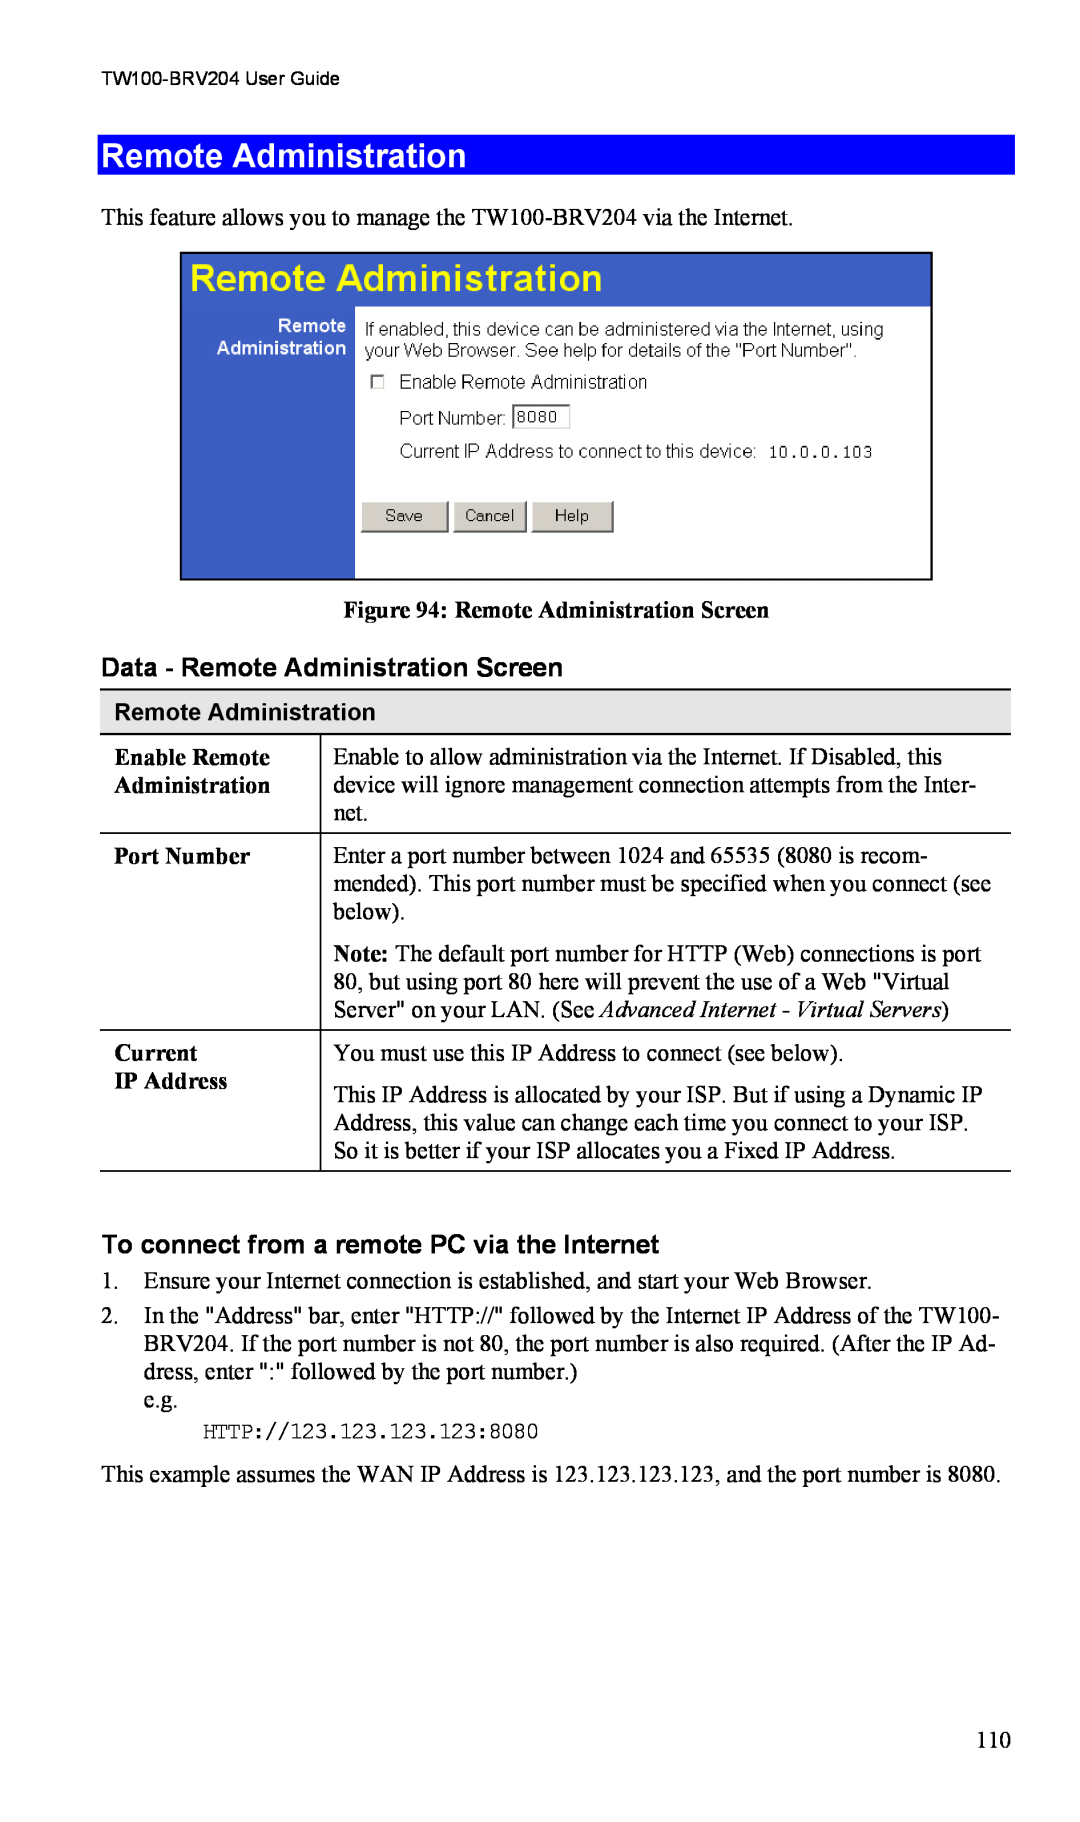 TRENDnet VPN Firewall Router manual Data - Remote Administration Screen, To connect from a remote PC via the Internet 